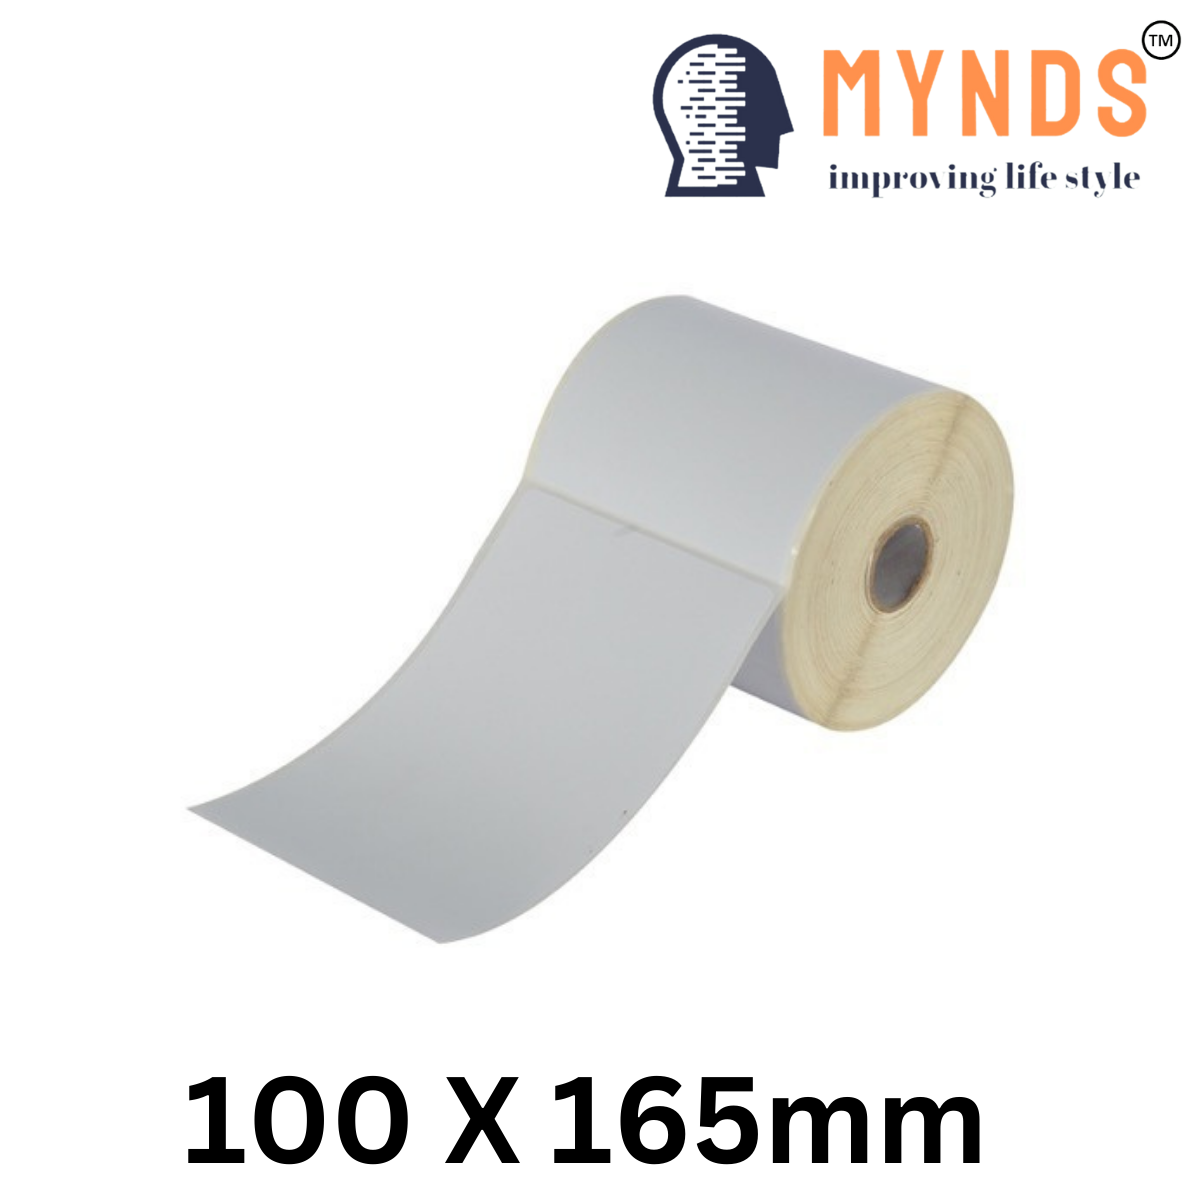 100 x 165 DT Label Rolls by MYNDS